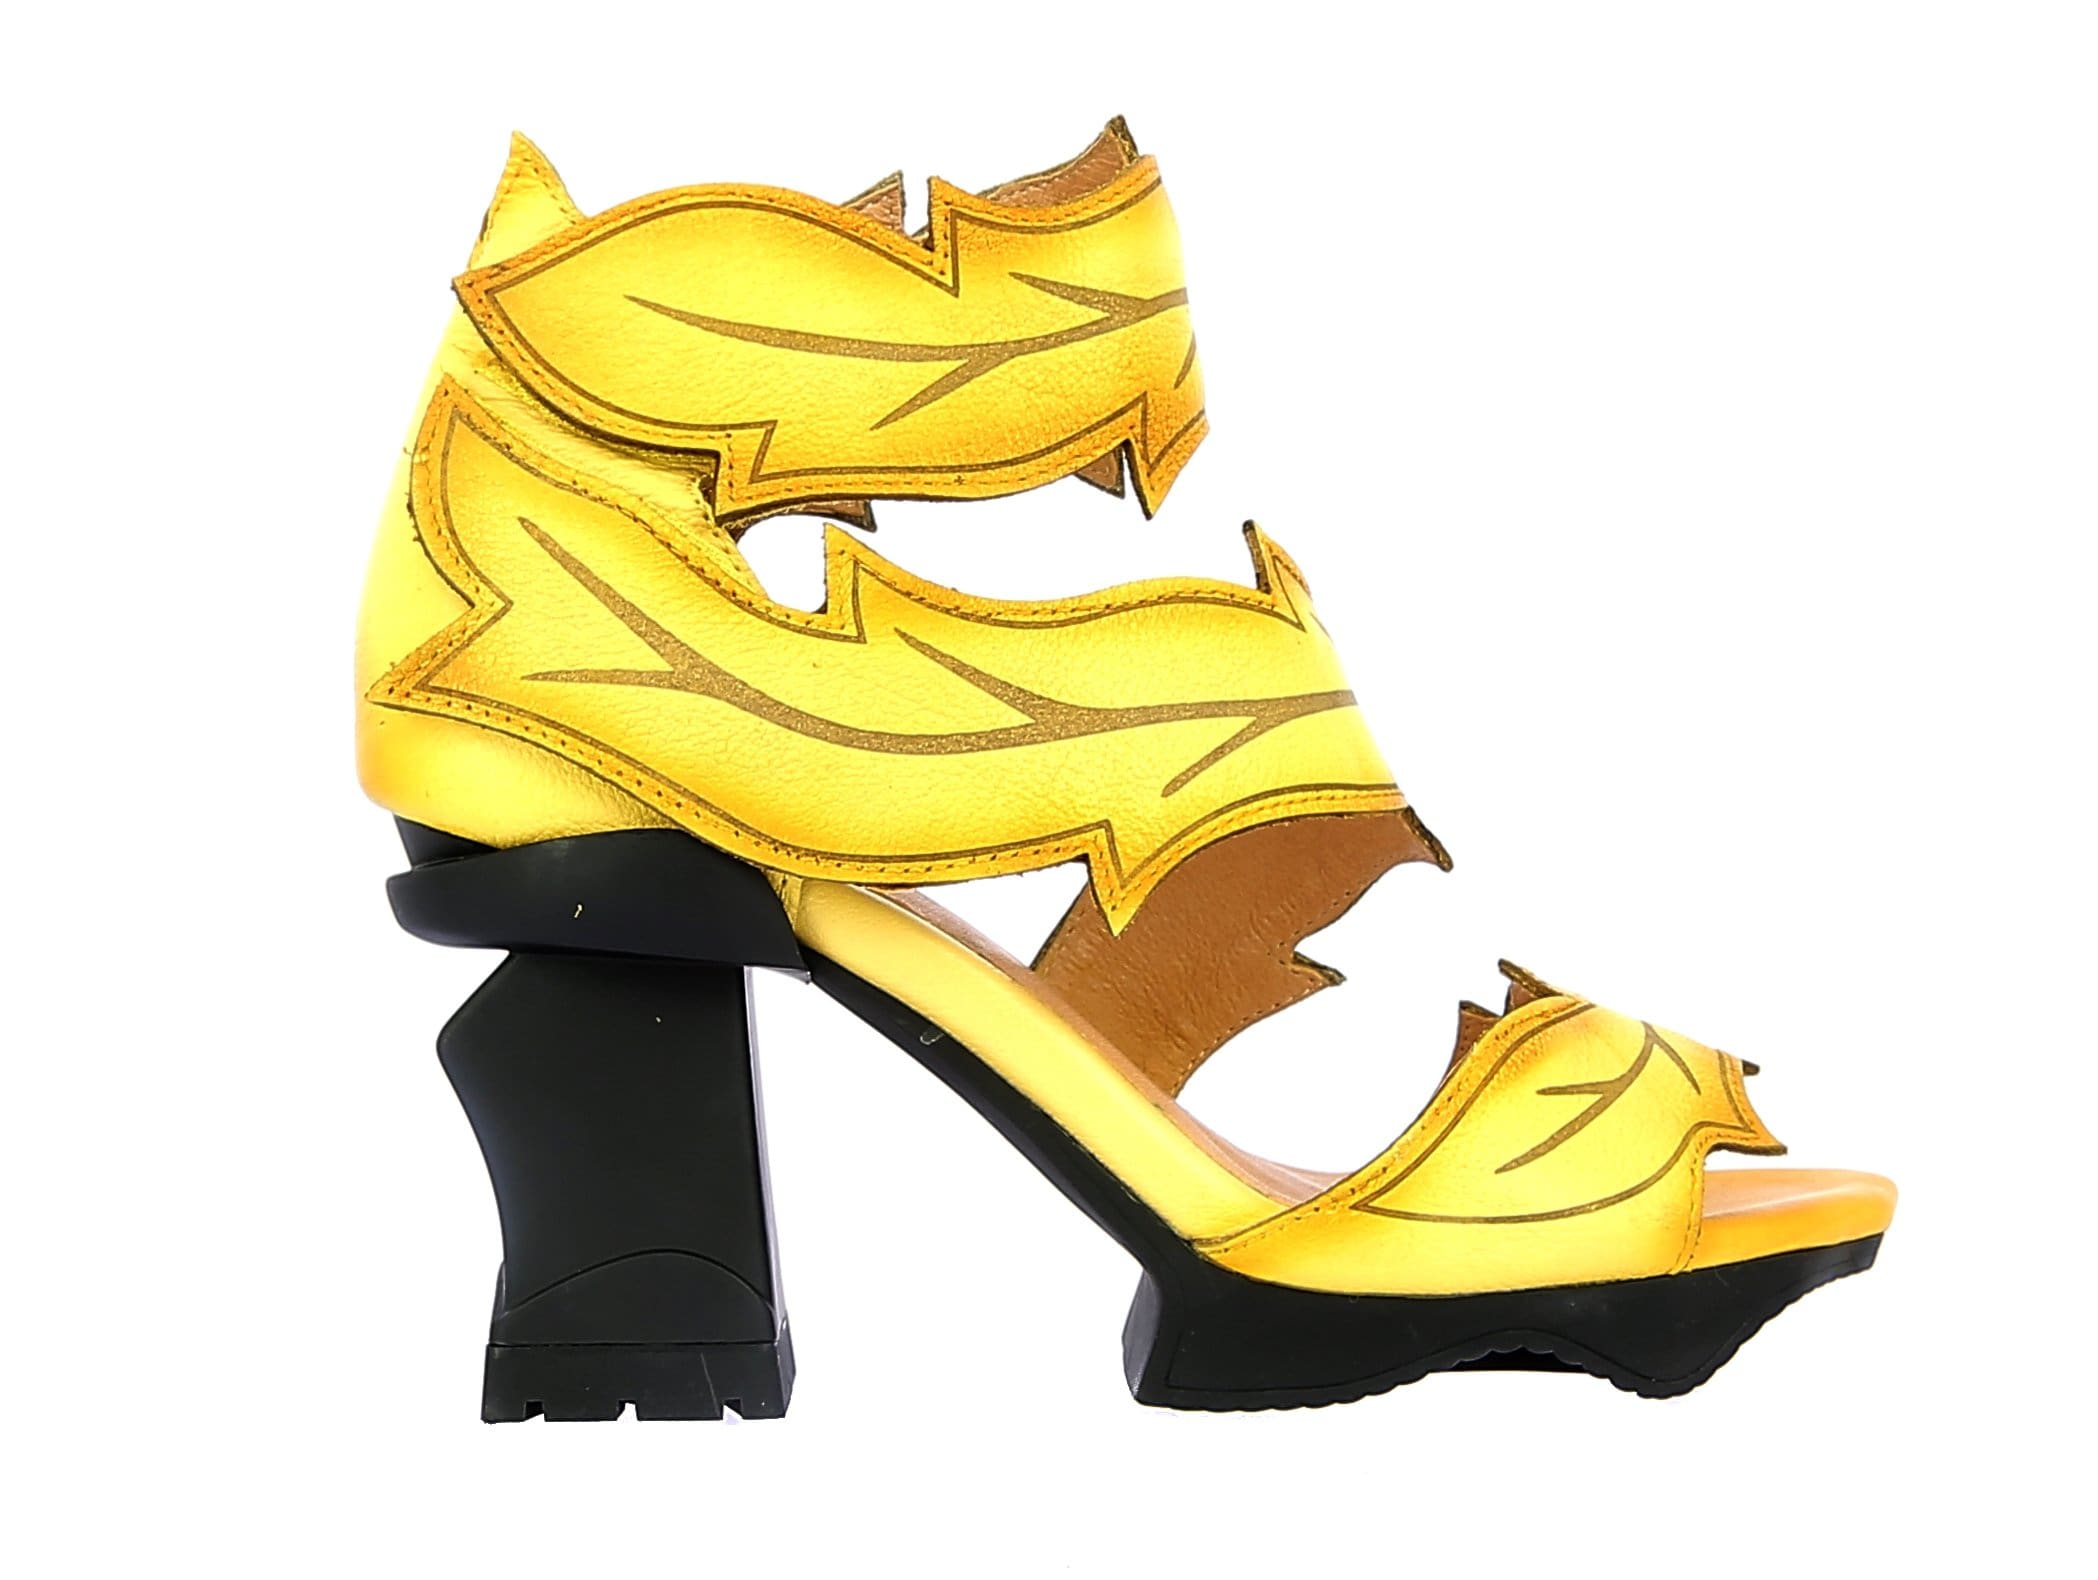 Chaussure ARCMANCEO185 - 35 / YELLOW - Sandale